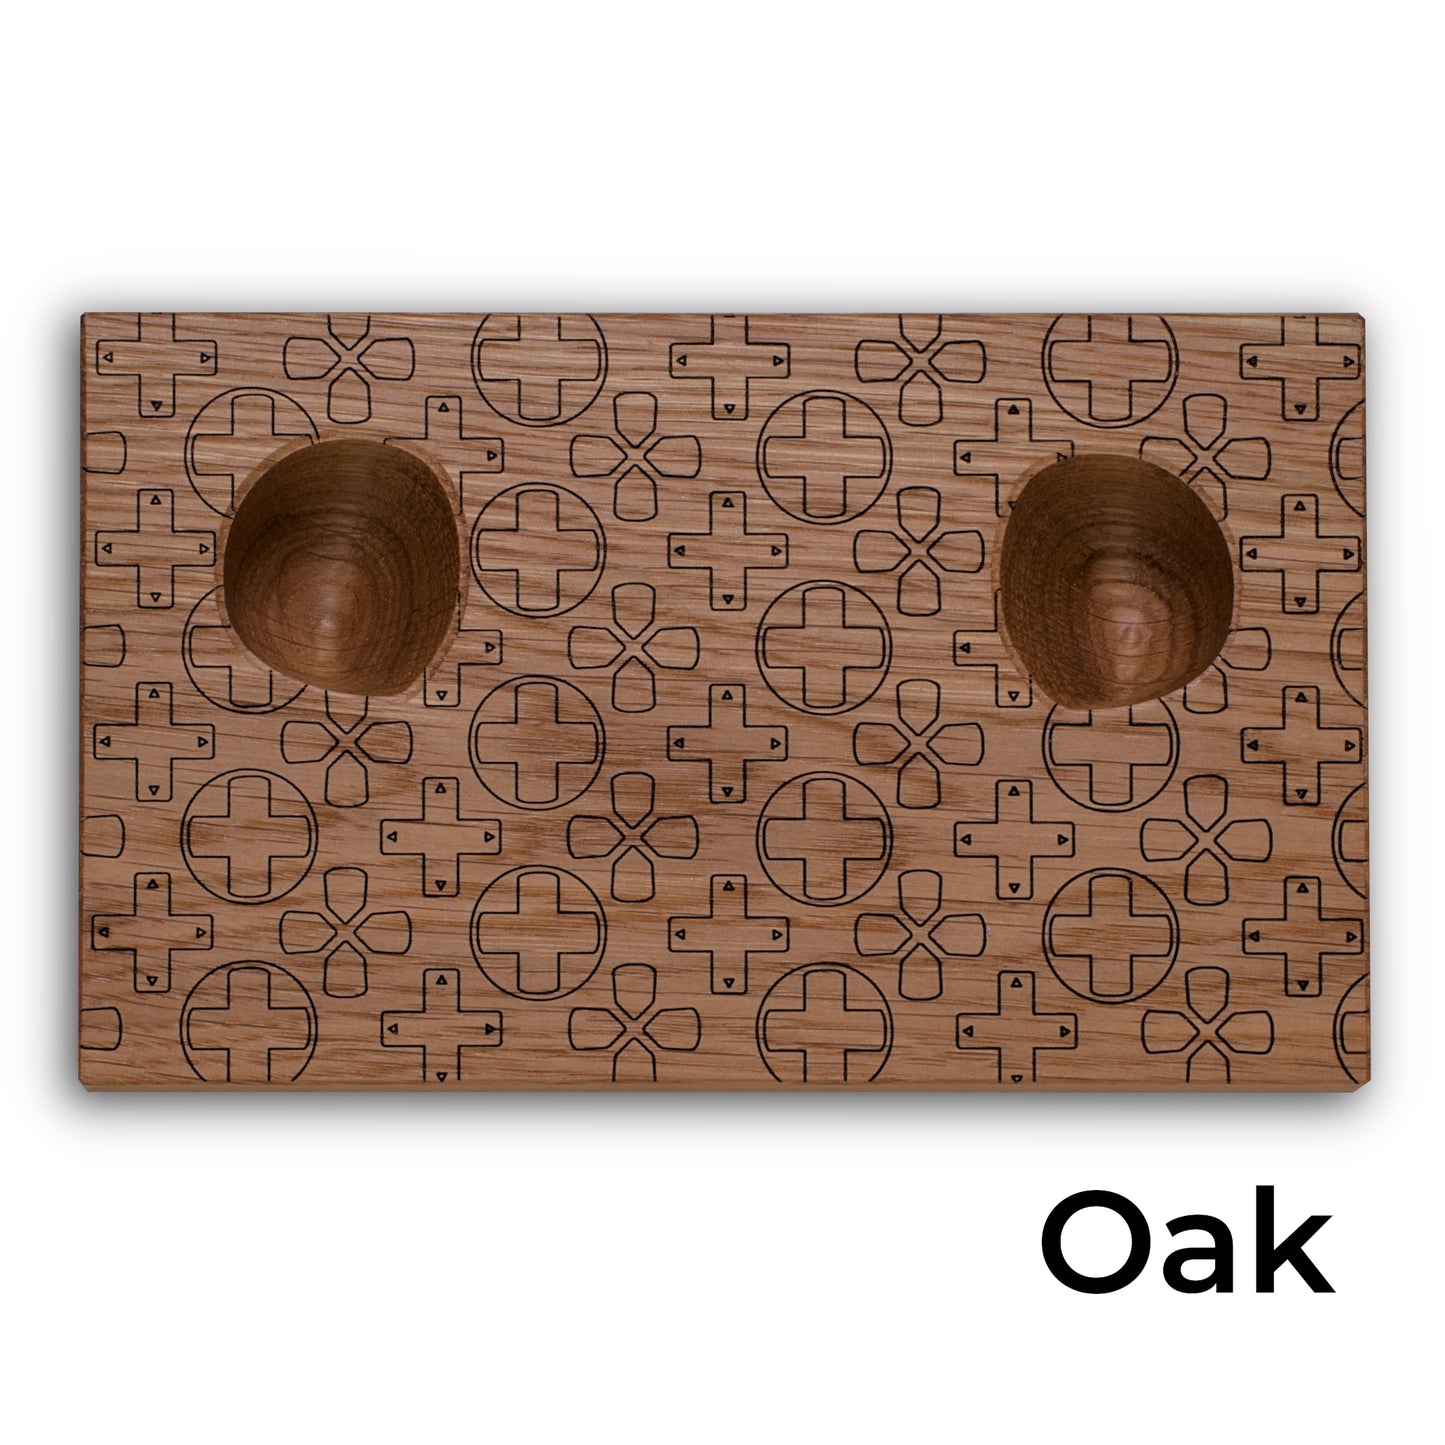 Wooden stand with d-pad design in oak for Xbox series X|S controller